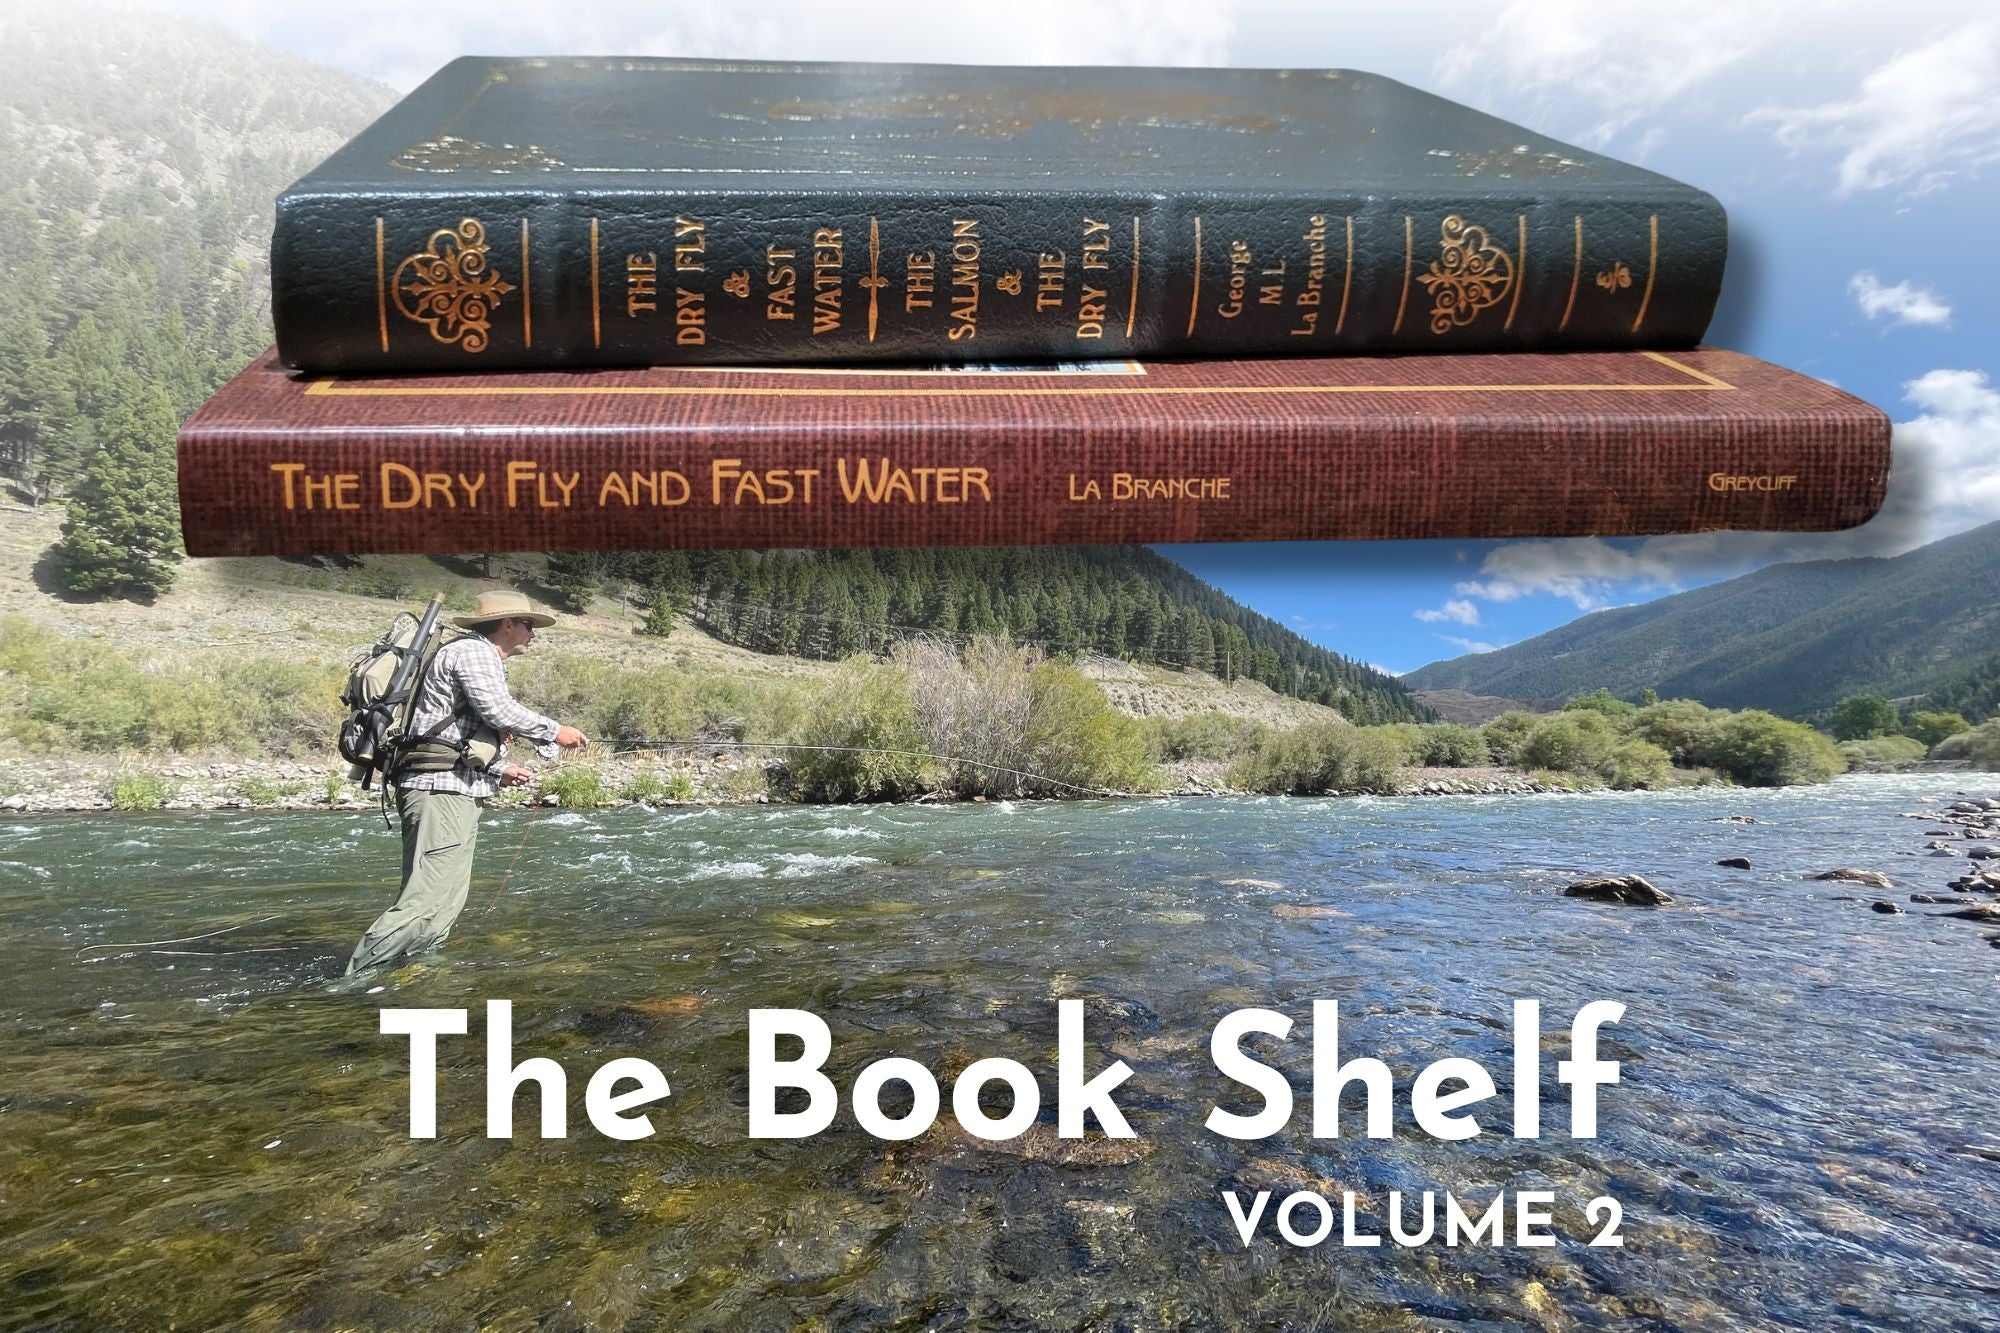 The Book Shelf - Volume 2 - G.L.M. LaBranche – The Dry Fly & Fast Water - 1914